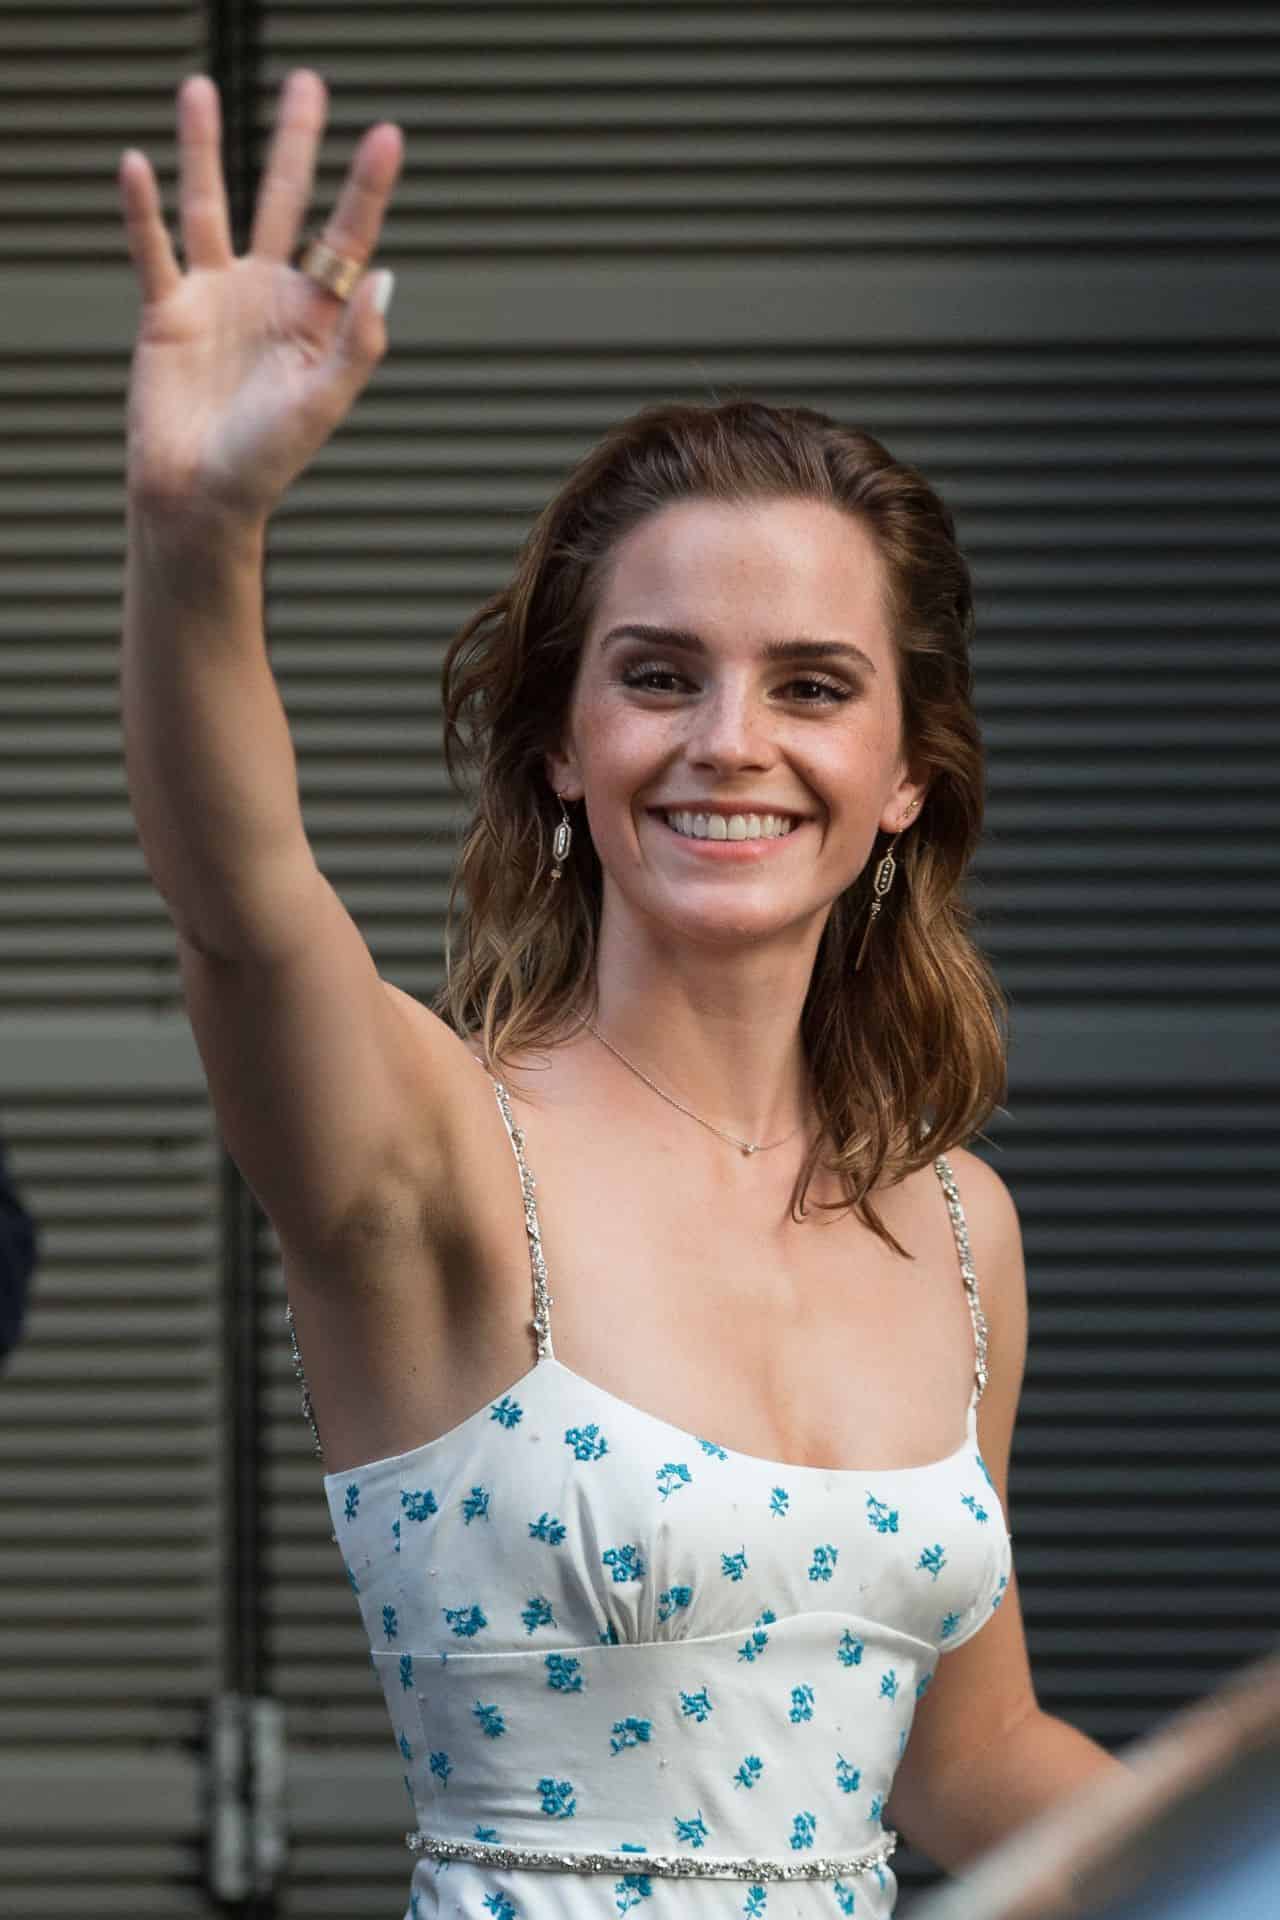 Emma Watson Showed Off her Sensational Cleavage in a White Fairytale Dress